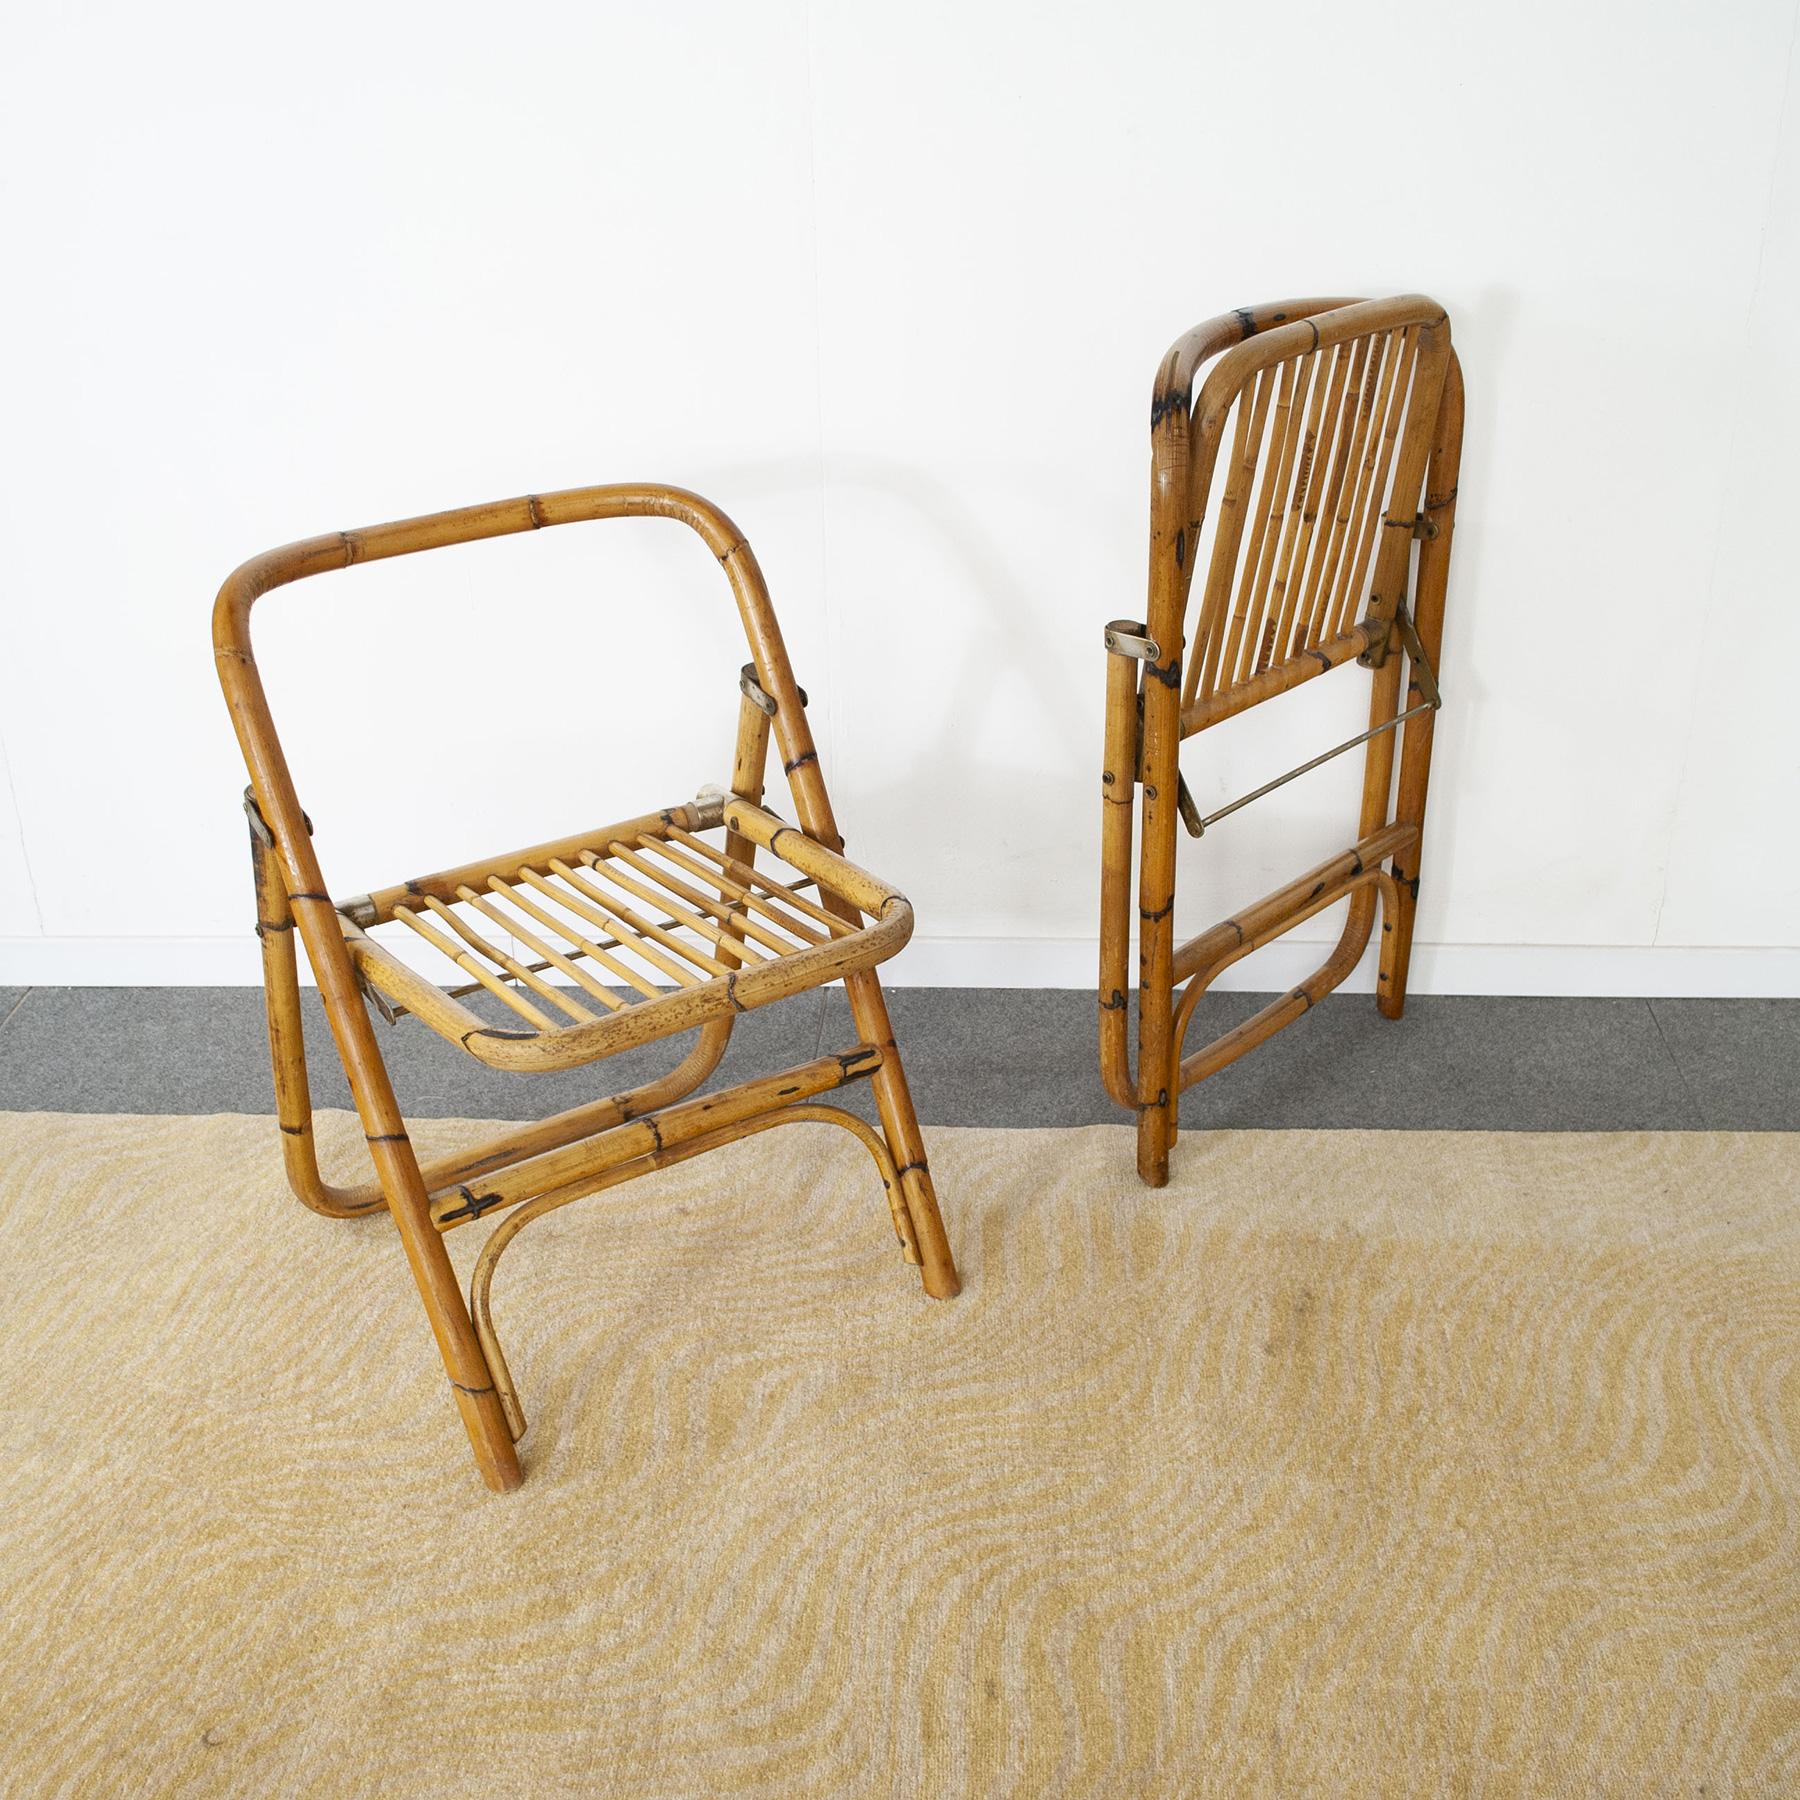 Dal Vera Italian Mid Century Pair of Bamboo Chairs For Sale 2